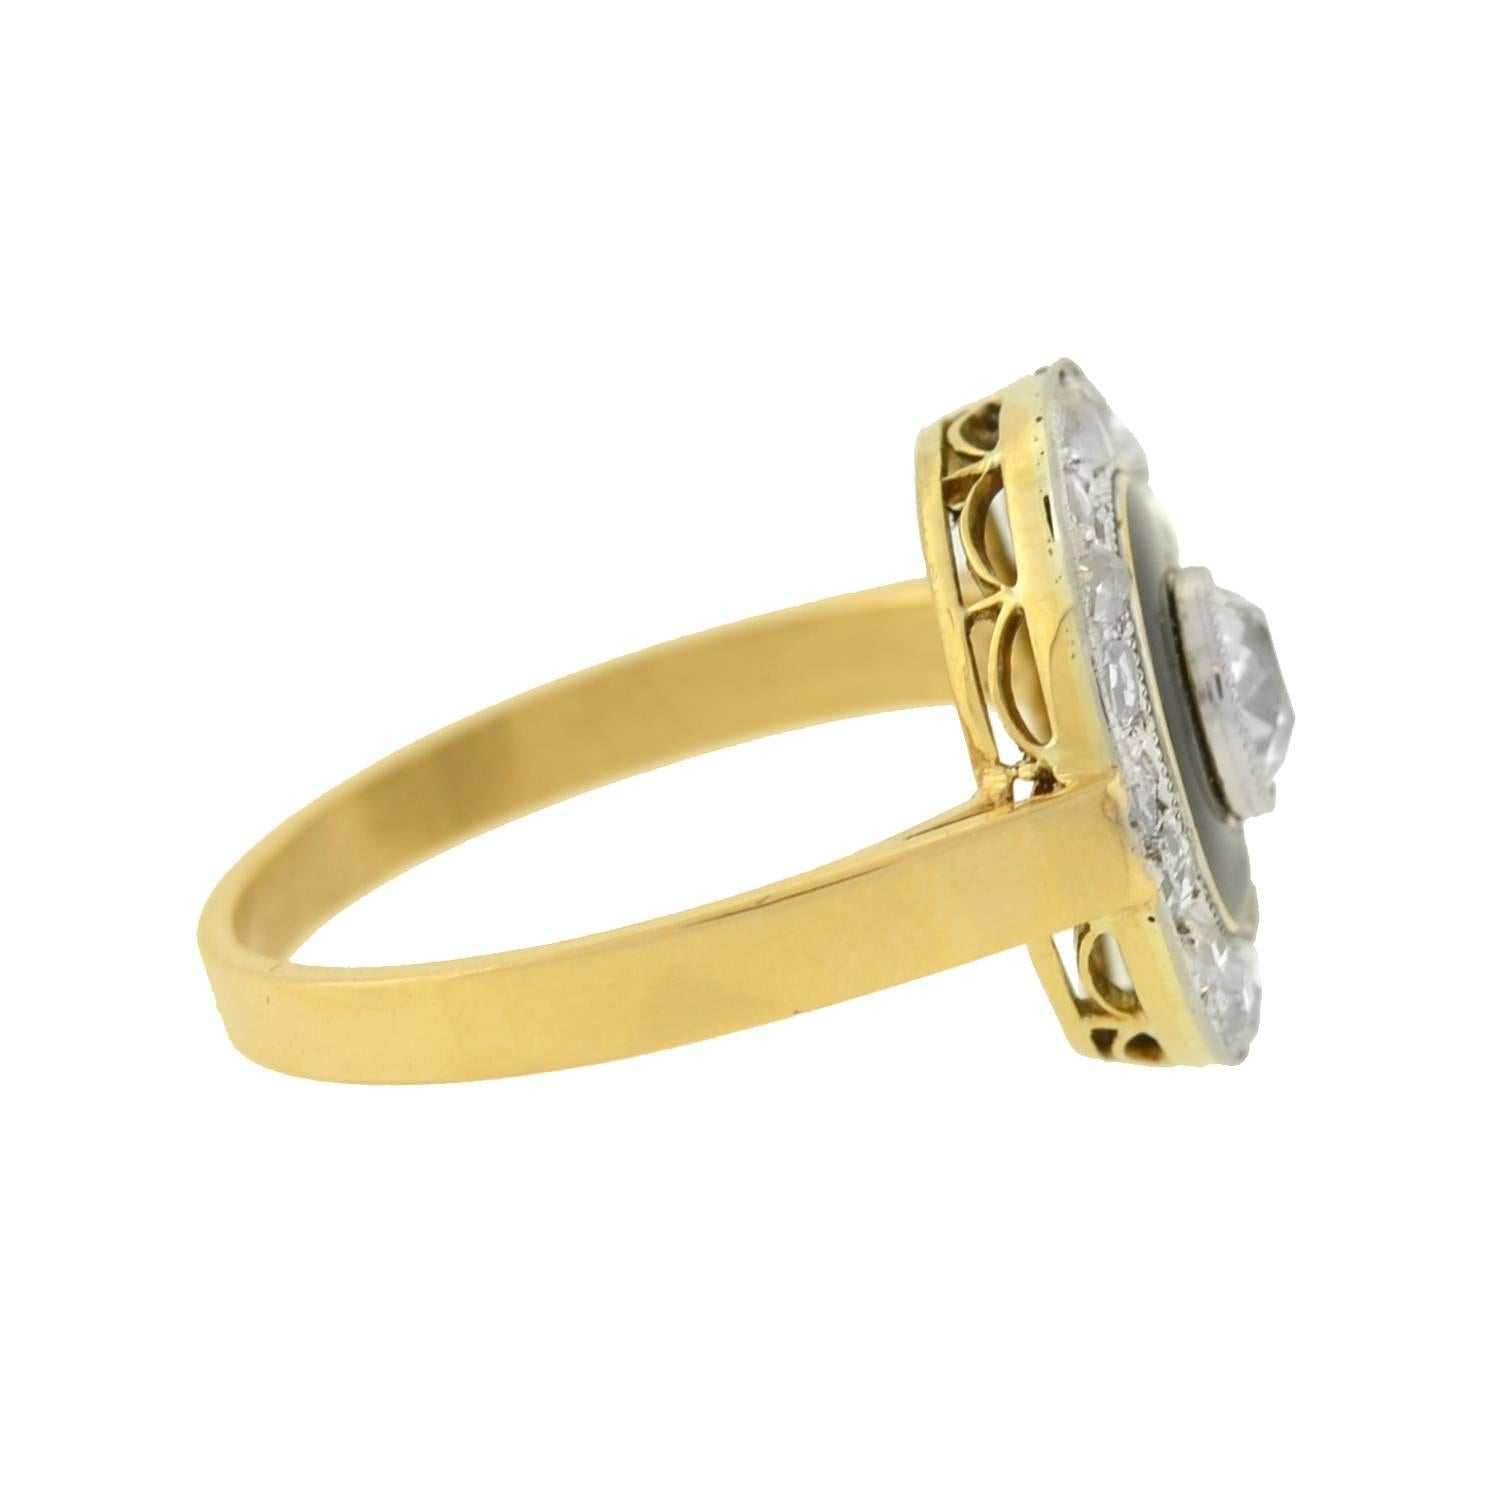 A very striking diamond ring from the Edwardian (ca1901) era! This gorgeous mixed metals design is crafted in 18kt gold and topped in platinum. The flat, circular centerpiece features a sparkling old Mine Cut diamond at the center, which weighs